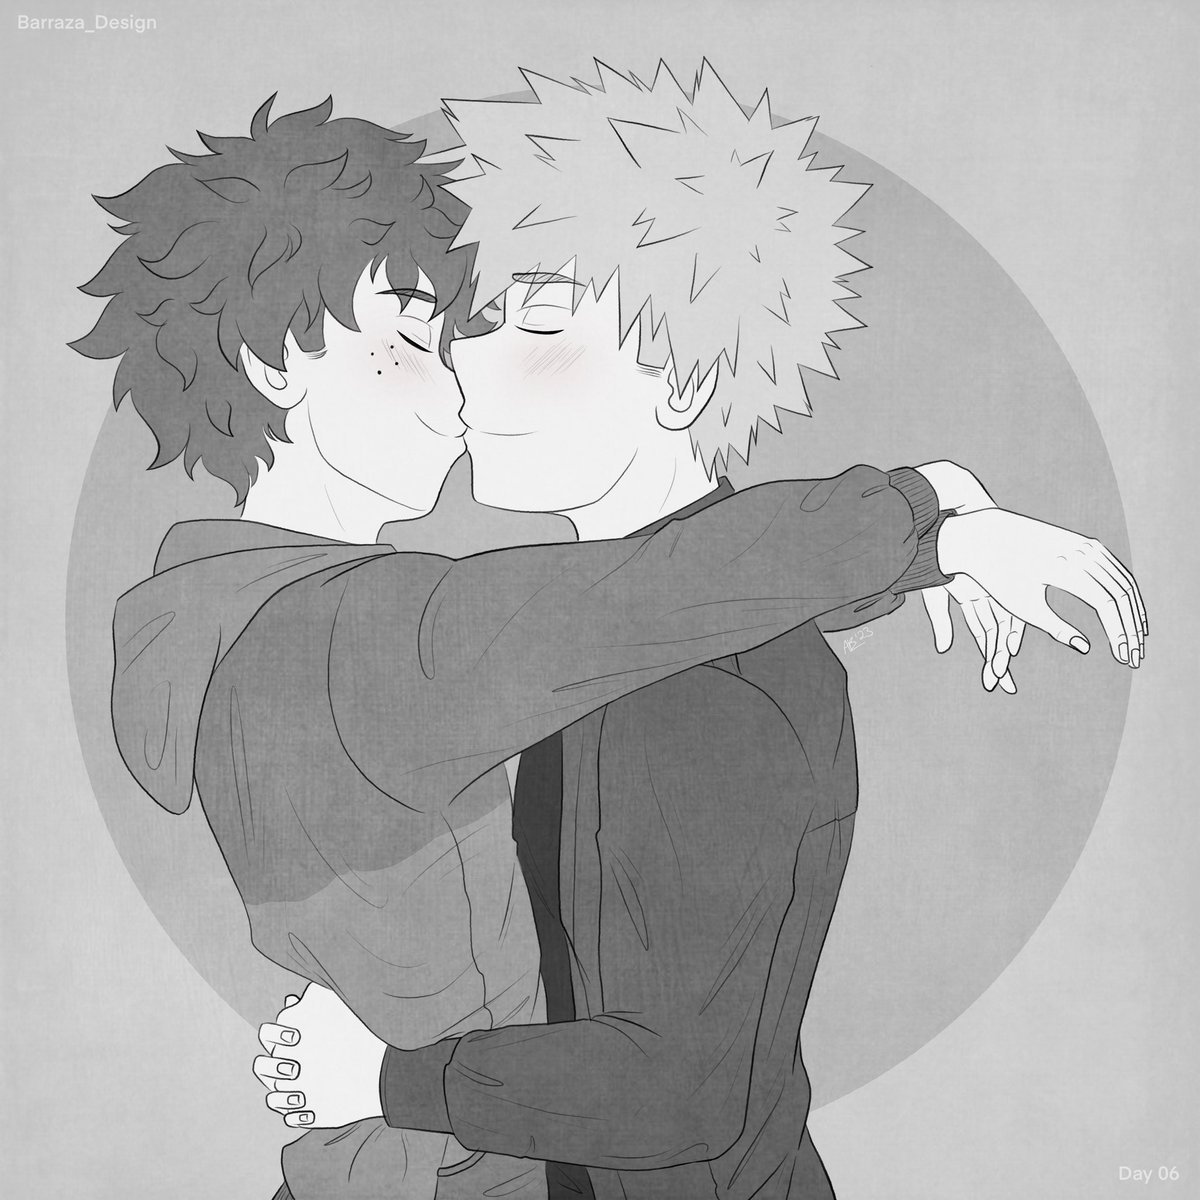 #bkdkinktober #bkdk #firstkiss

Day 06 - First Kiss

You /know/ Izuku’s on his toes to be the same height as Katsuki for this